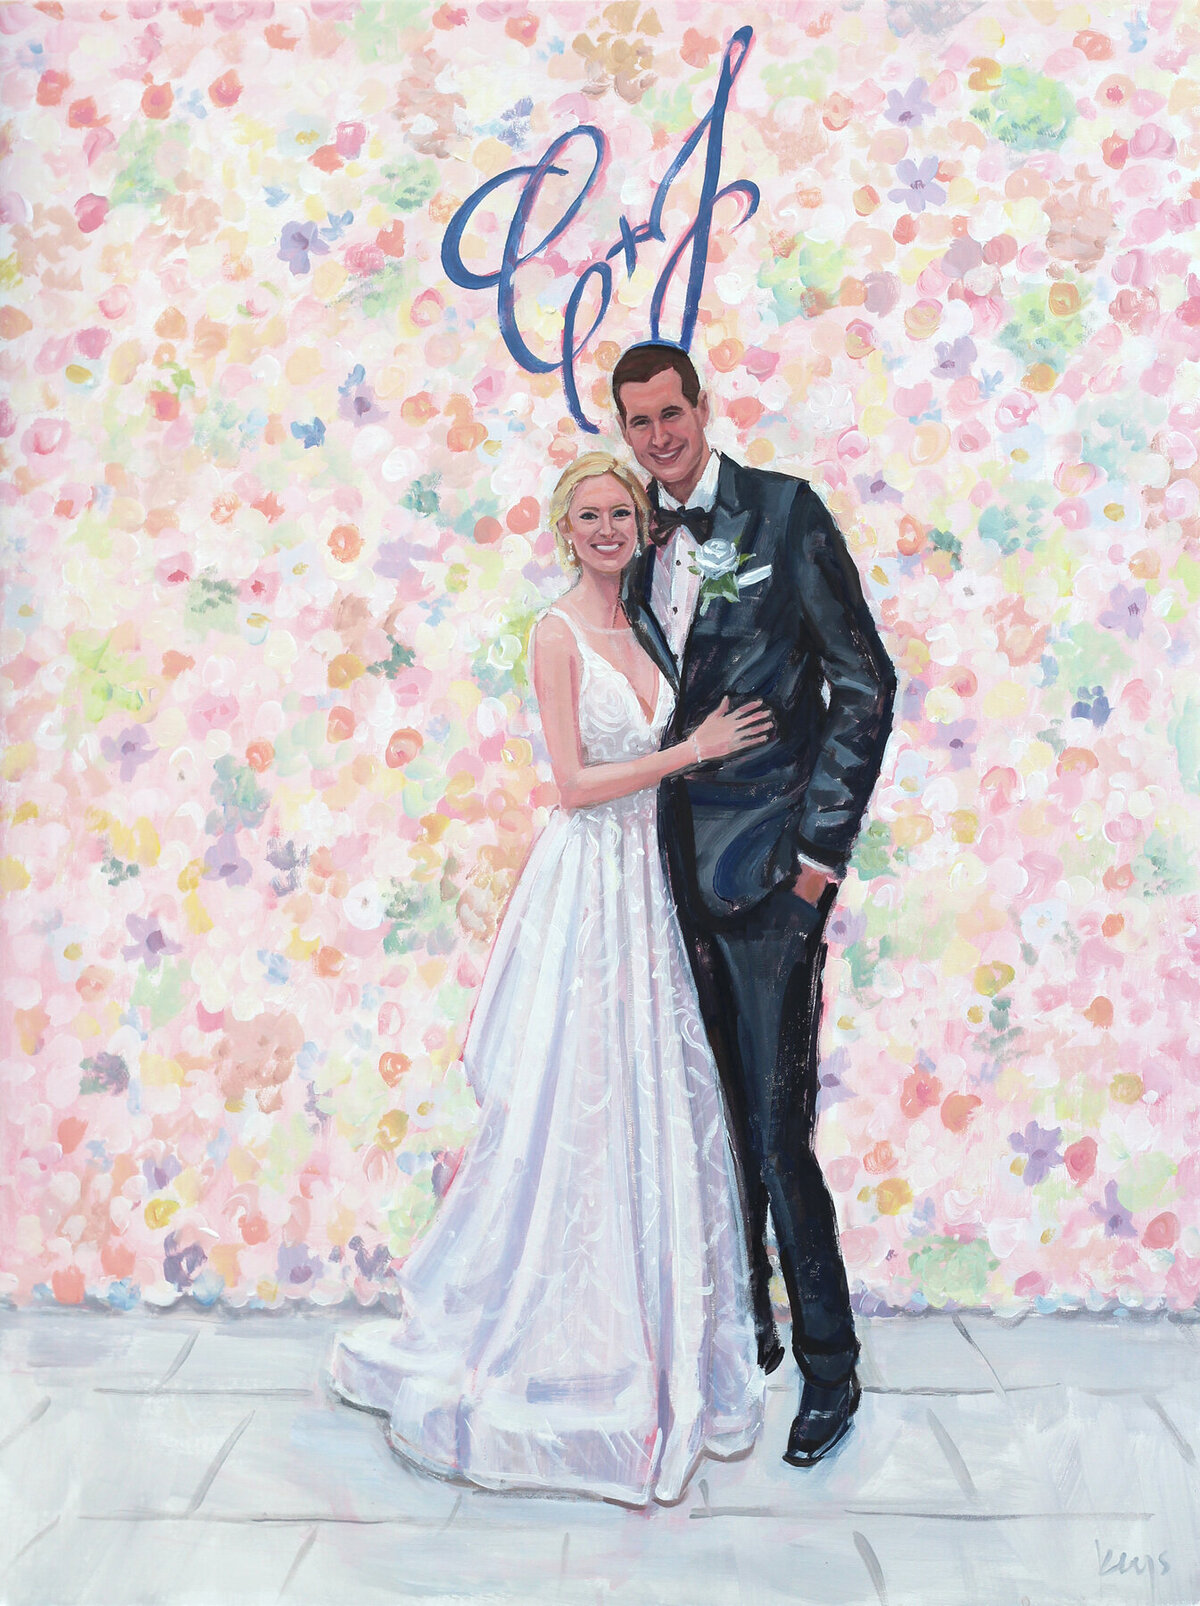 Wedding Painting Commissions by Ben Keys | David Cohen, 18 x 24 inch canvas, web